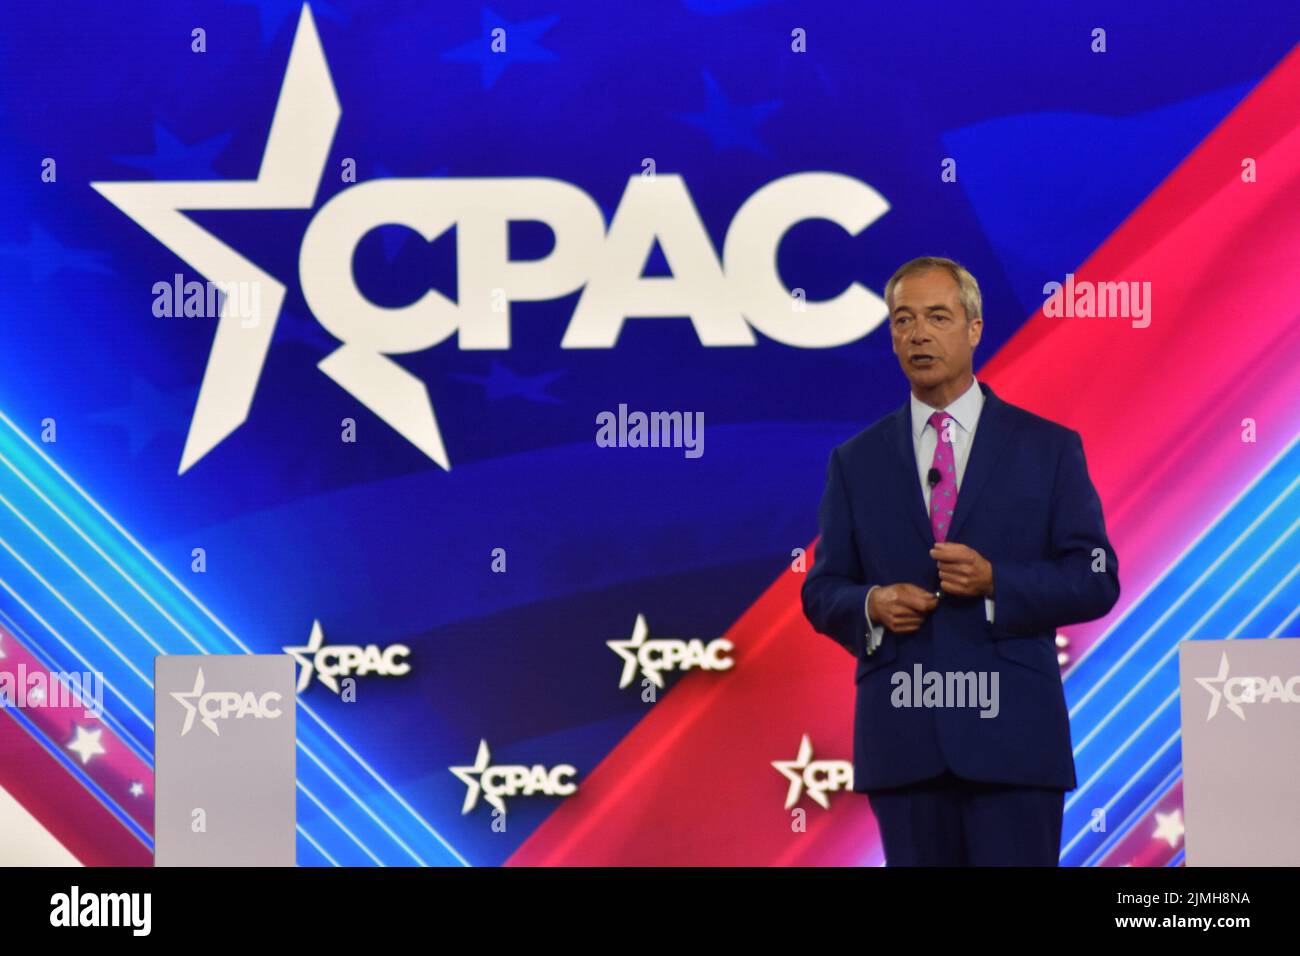 Dallas, TX, USA. 6th Aug, 2022. (NEW) Nigel Farage delivers remarks at the Conservative Political Action Conference 2022 in Dallas, Texas. August 6, 2022, Dallas, TX, USA. Nigel Farage delivers remarks during the Conservative Political Action Conference (CPAC), held in the state of Texas, in United States, on Saturday (6). Nigel Paul Farage is a British broadcaster and former politician who was Leader of the UK Independence Party from 2006 to 2009 and 2010 to 2016 and Leader of the Brexit Party from 2019 to 2021. Credit: ZUMA Press, Inc./Alamy Live News Credit: ZUMA Press, Inc./Alamy Live News Stock Photo